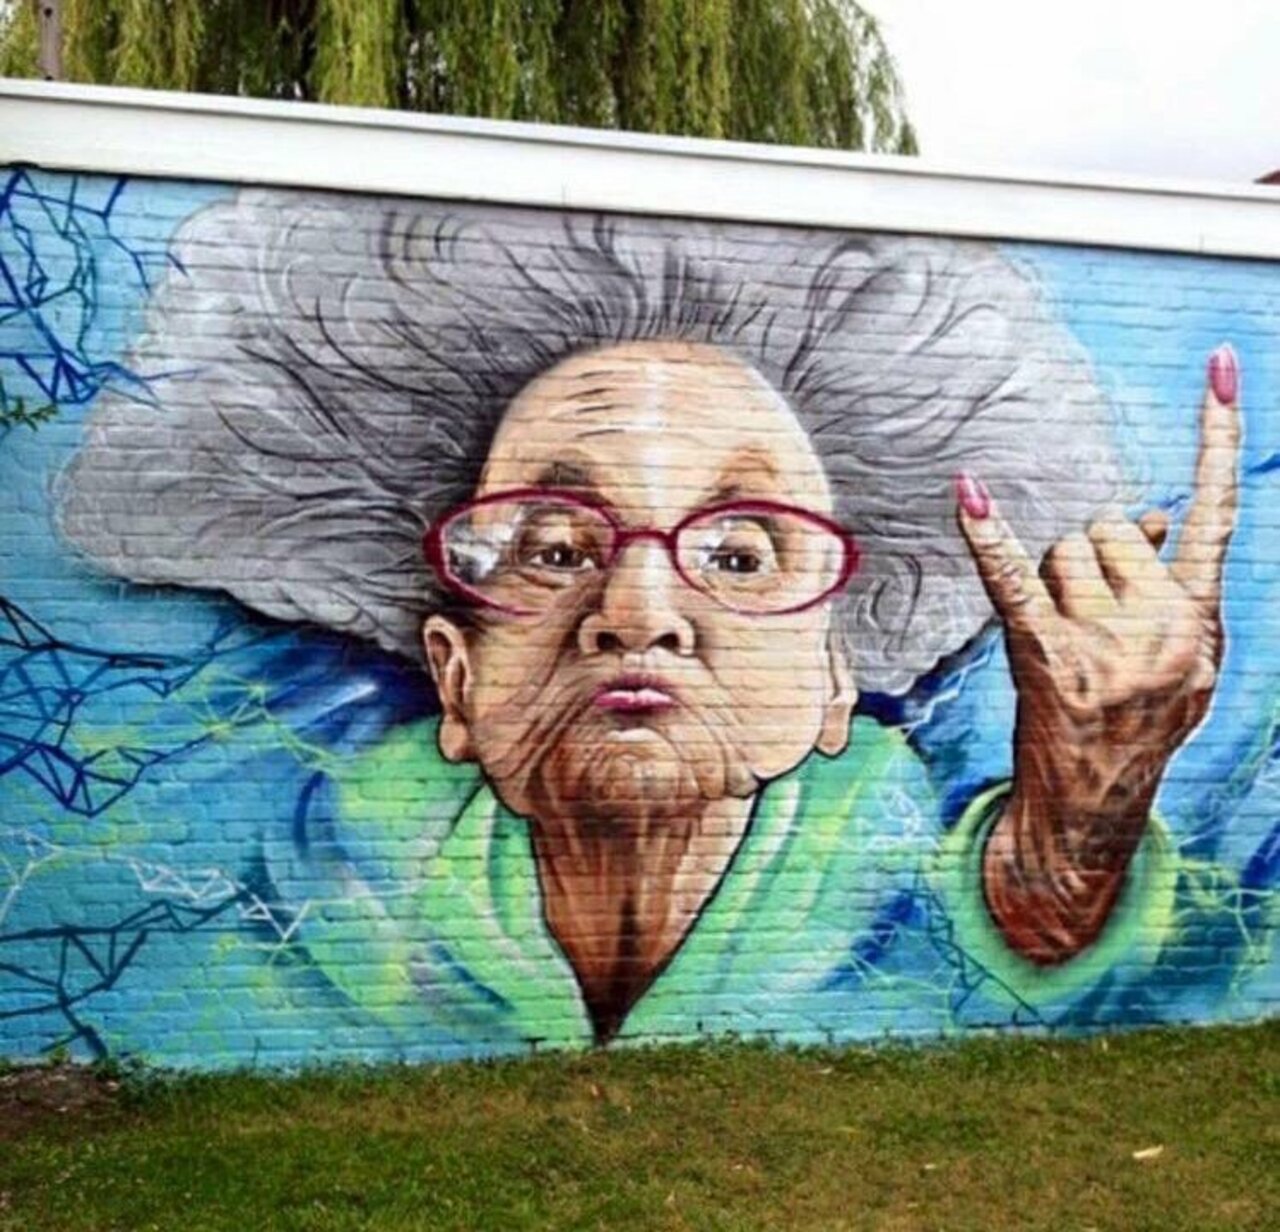 Because #Age is not on your ID – #Creative #StreetArt – Be ▲rtist – Be ▲rt Magazine https://beartistbeart.com/2016/10/26/because-age-is-not-on-your-id-creative-streetart/?utm_campaign=crowdfire&utm_content=crowdfire&utm_medium=social&utm_source=twitter https://t.co/3OriFUQnSo